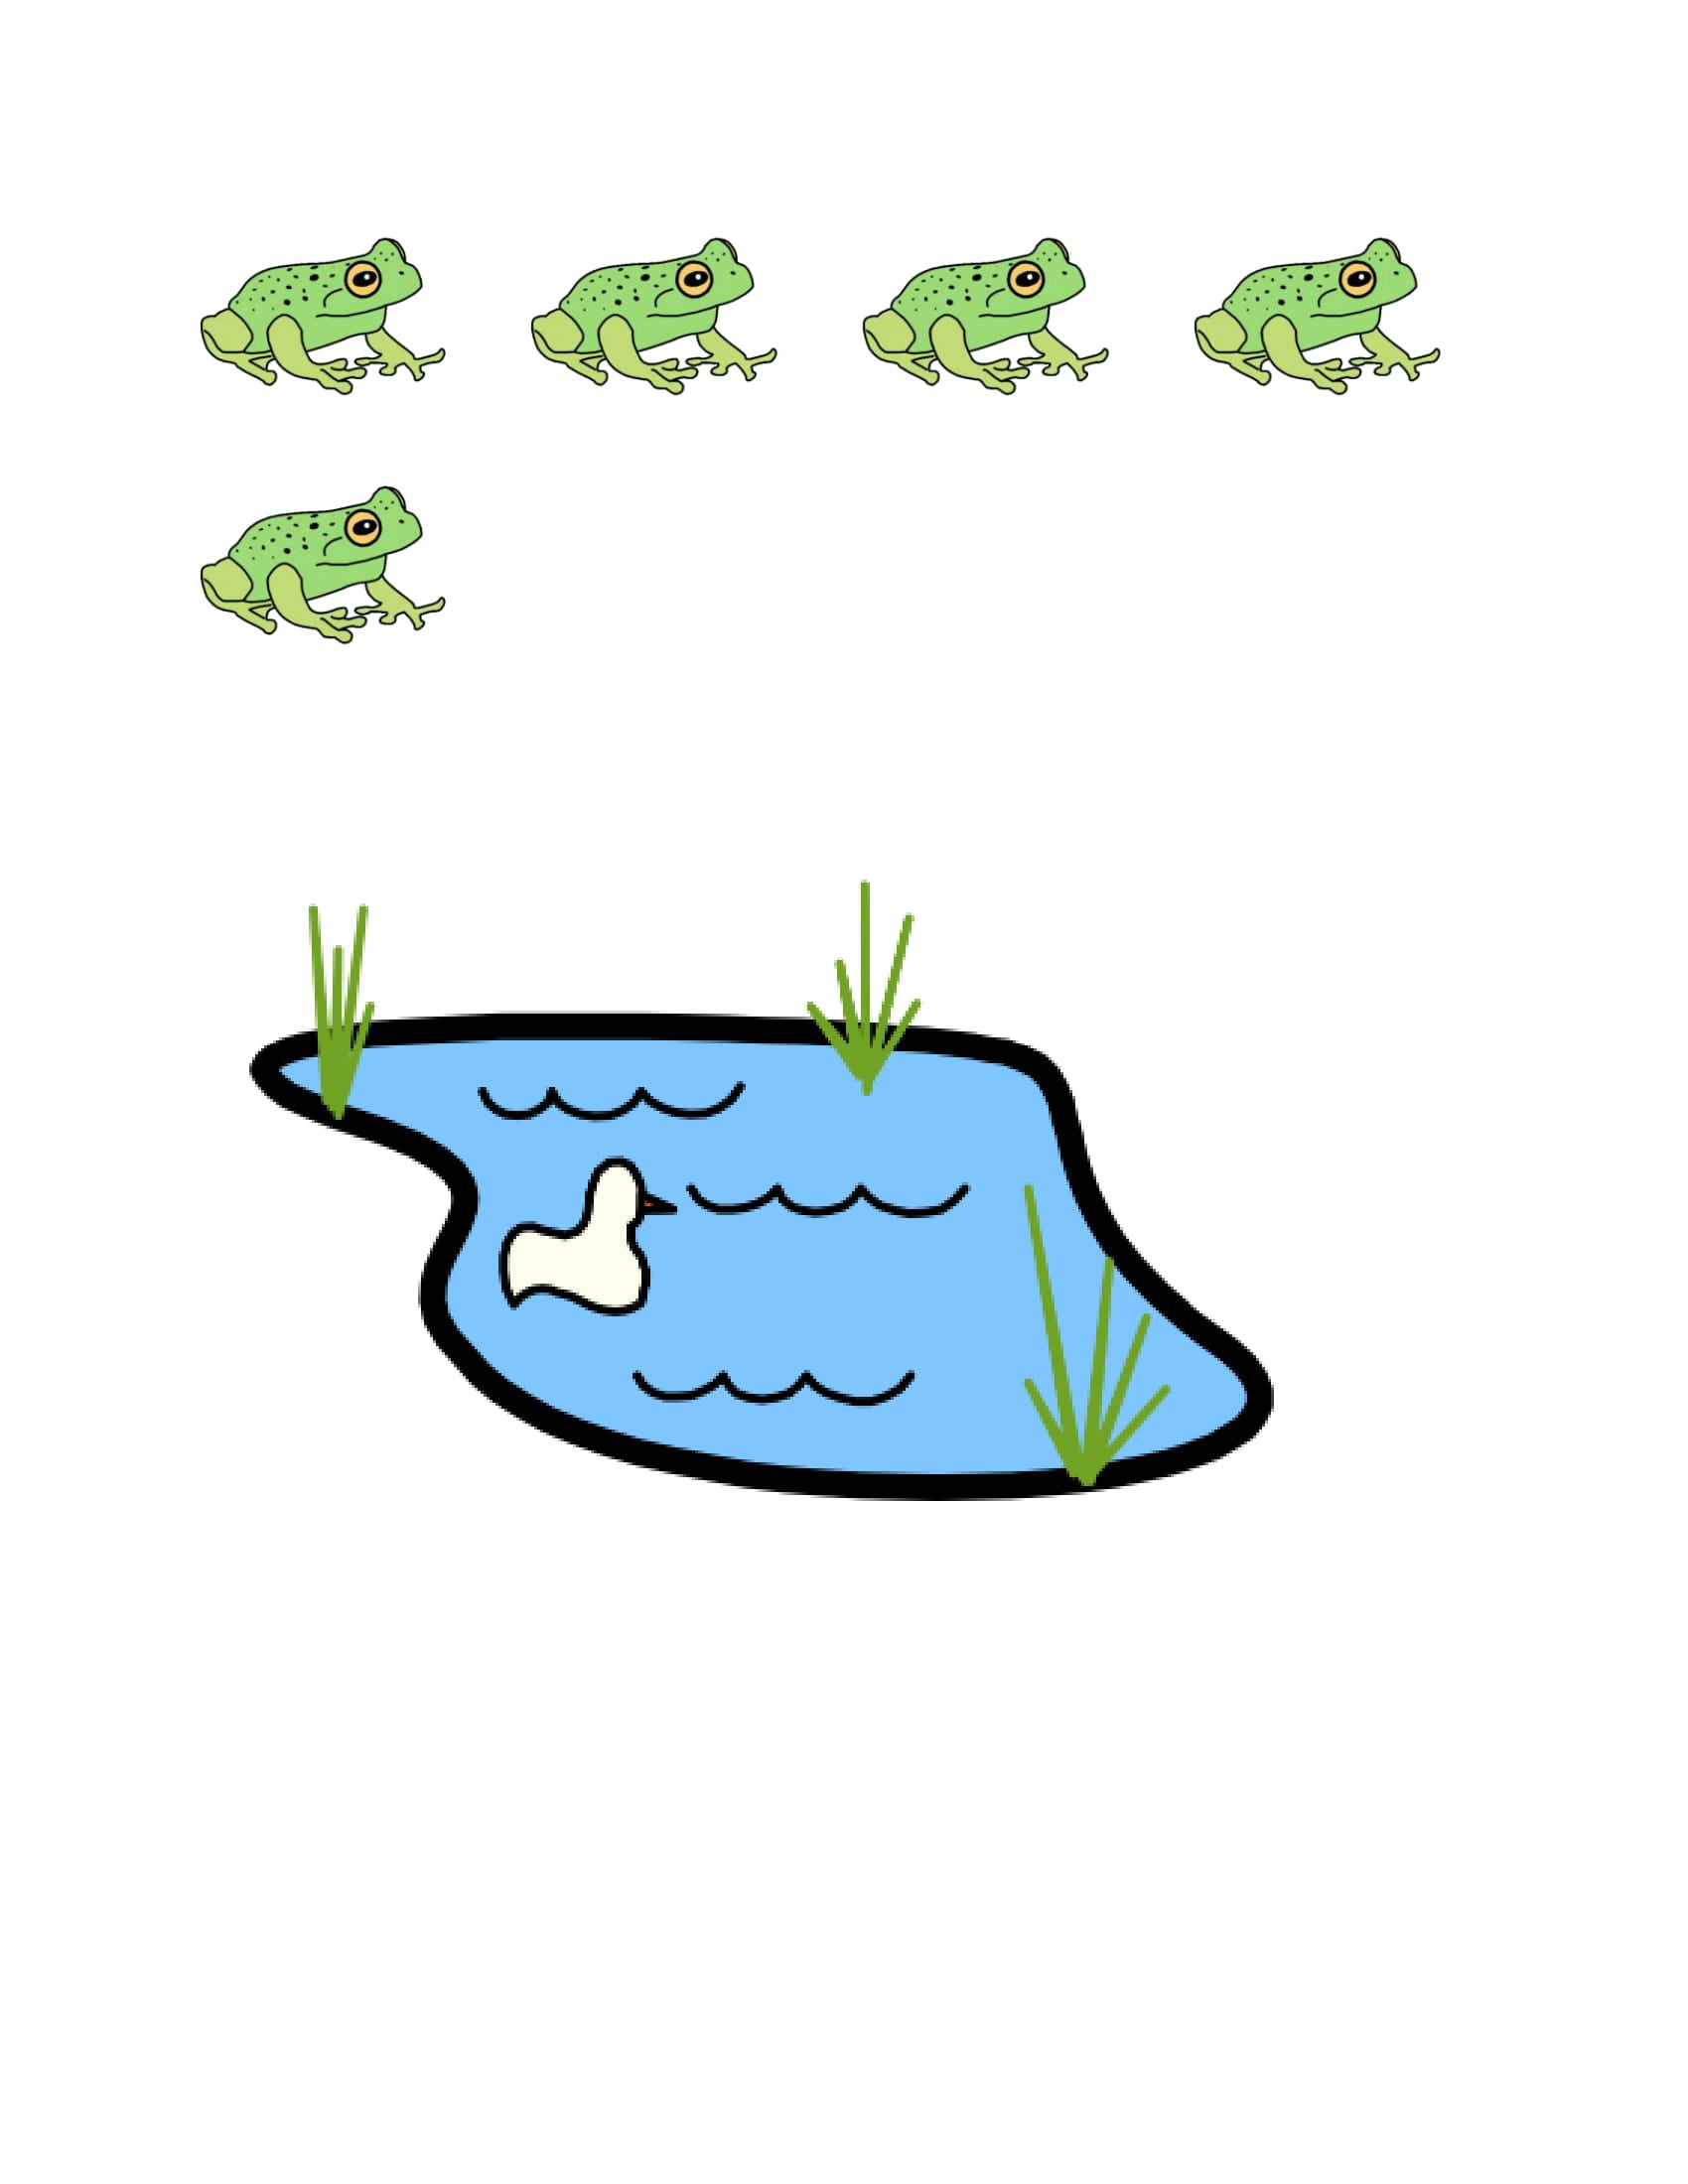 5 Speckled Frogs Cut Outs (Downloadable)